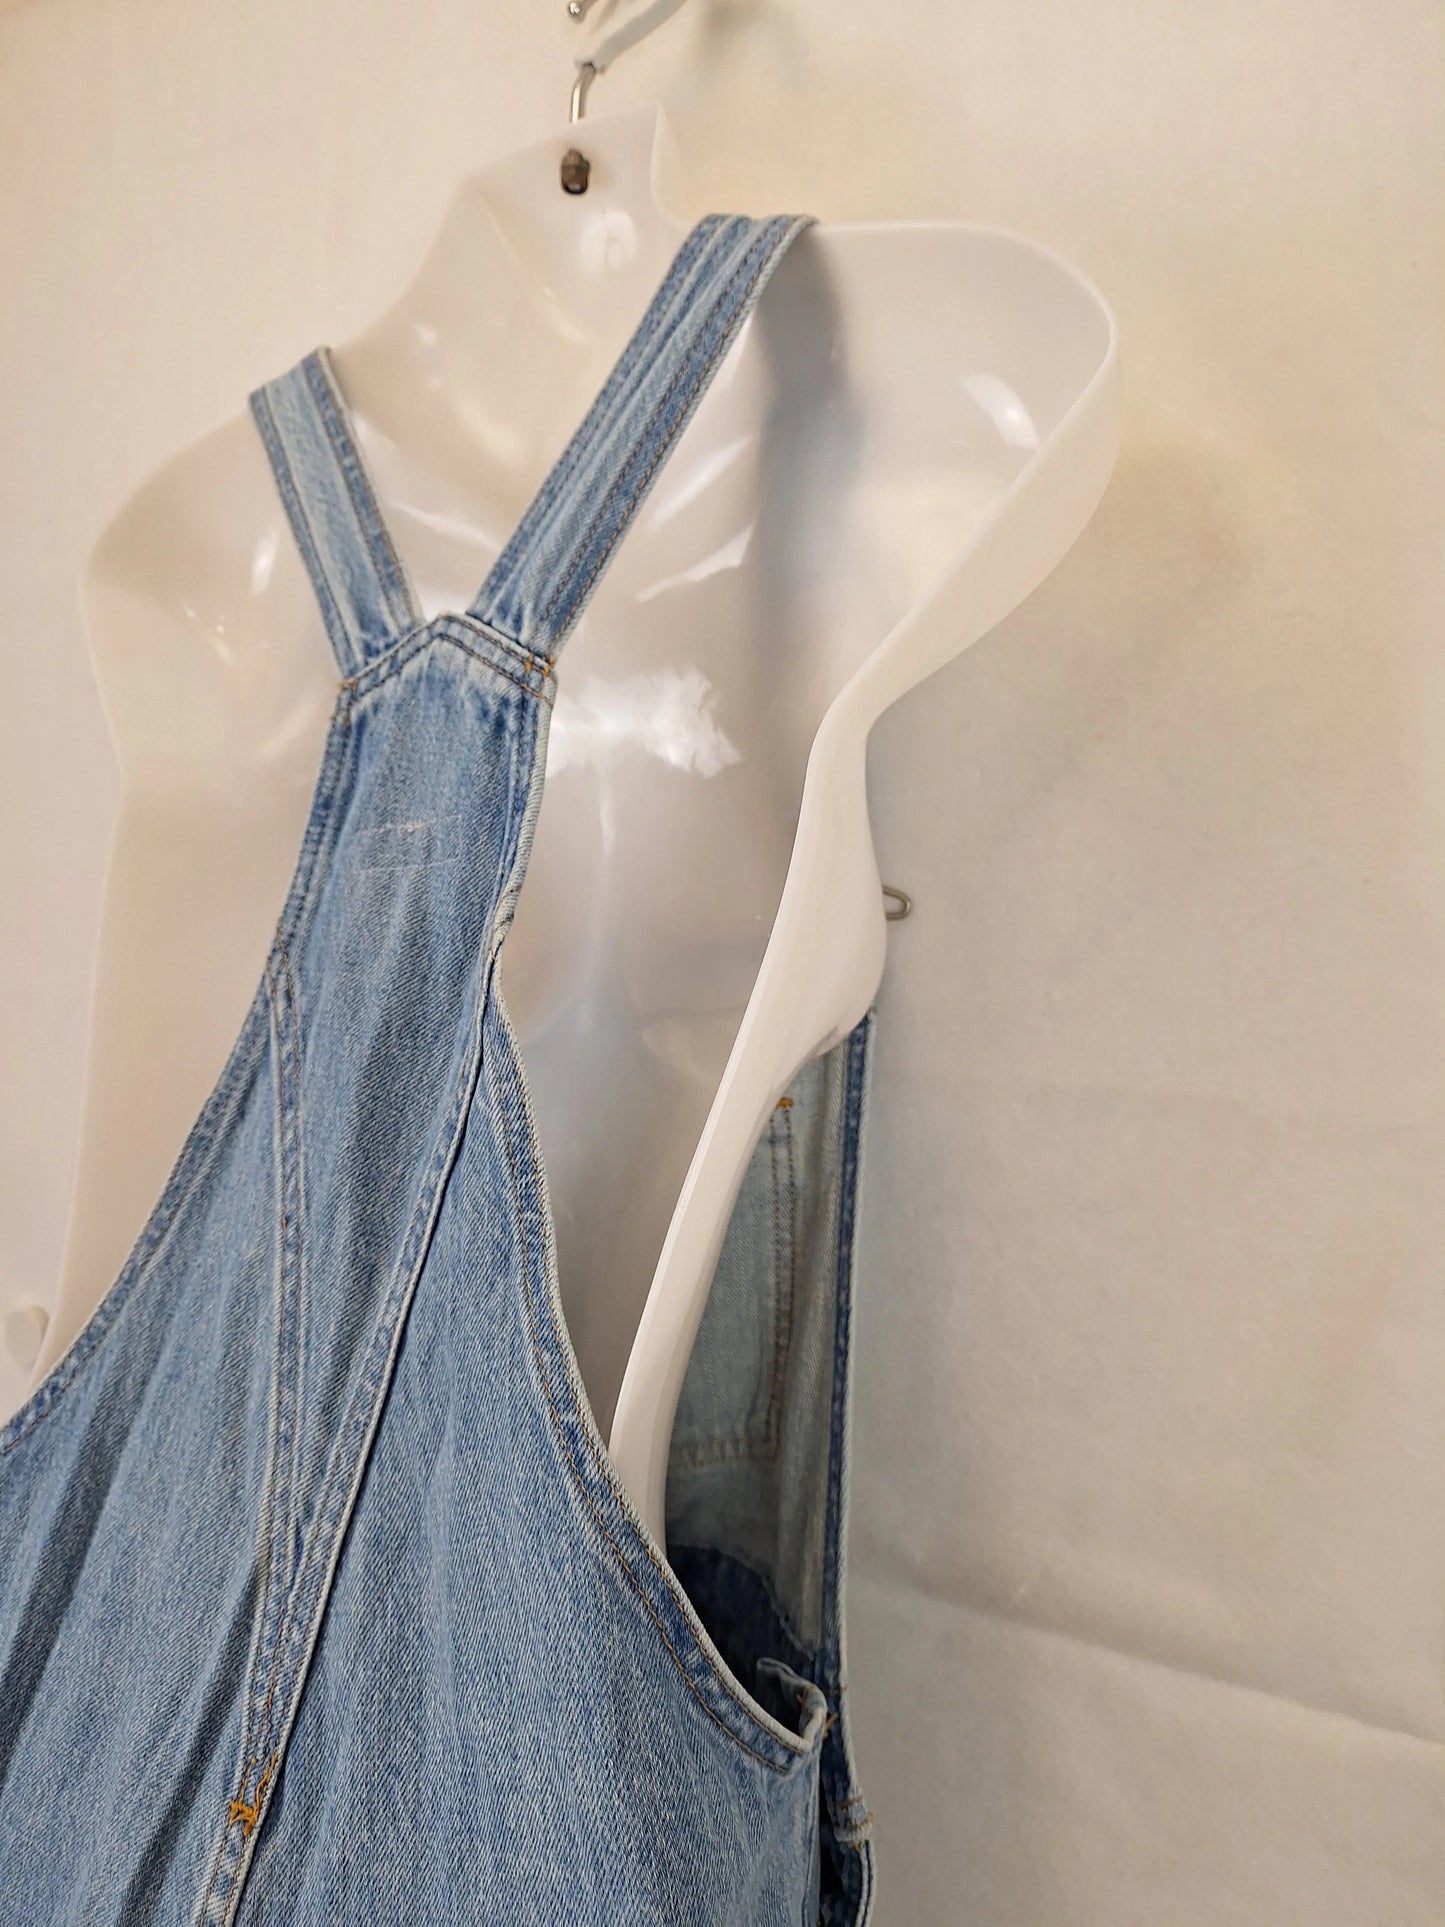 Levi's Everyday Relaxed Denim Overall Size S by SwapUp-Online Second Hand Store-Online Thrift Store